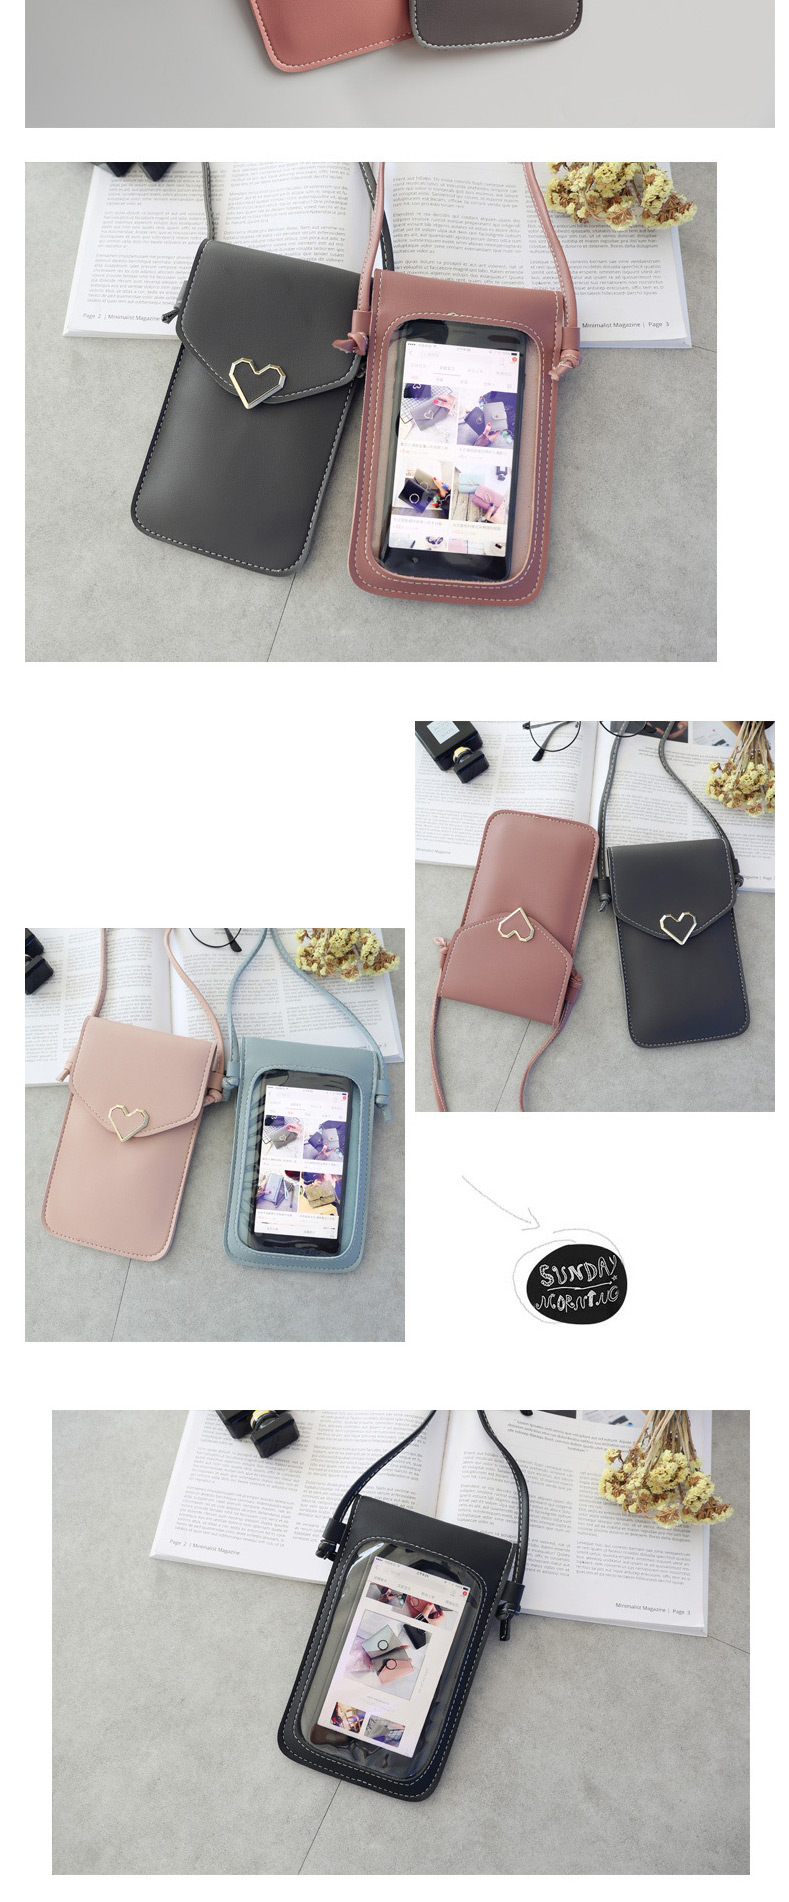 Fashion Gray-blue Caring Metal Transparent Touch Screen Multifunctional Mobile Phone Bag,Shoulder bags